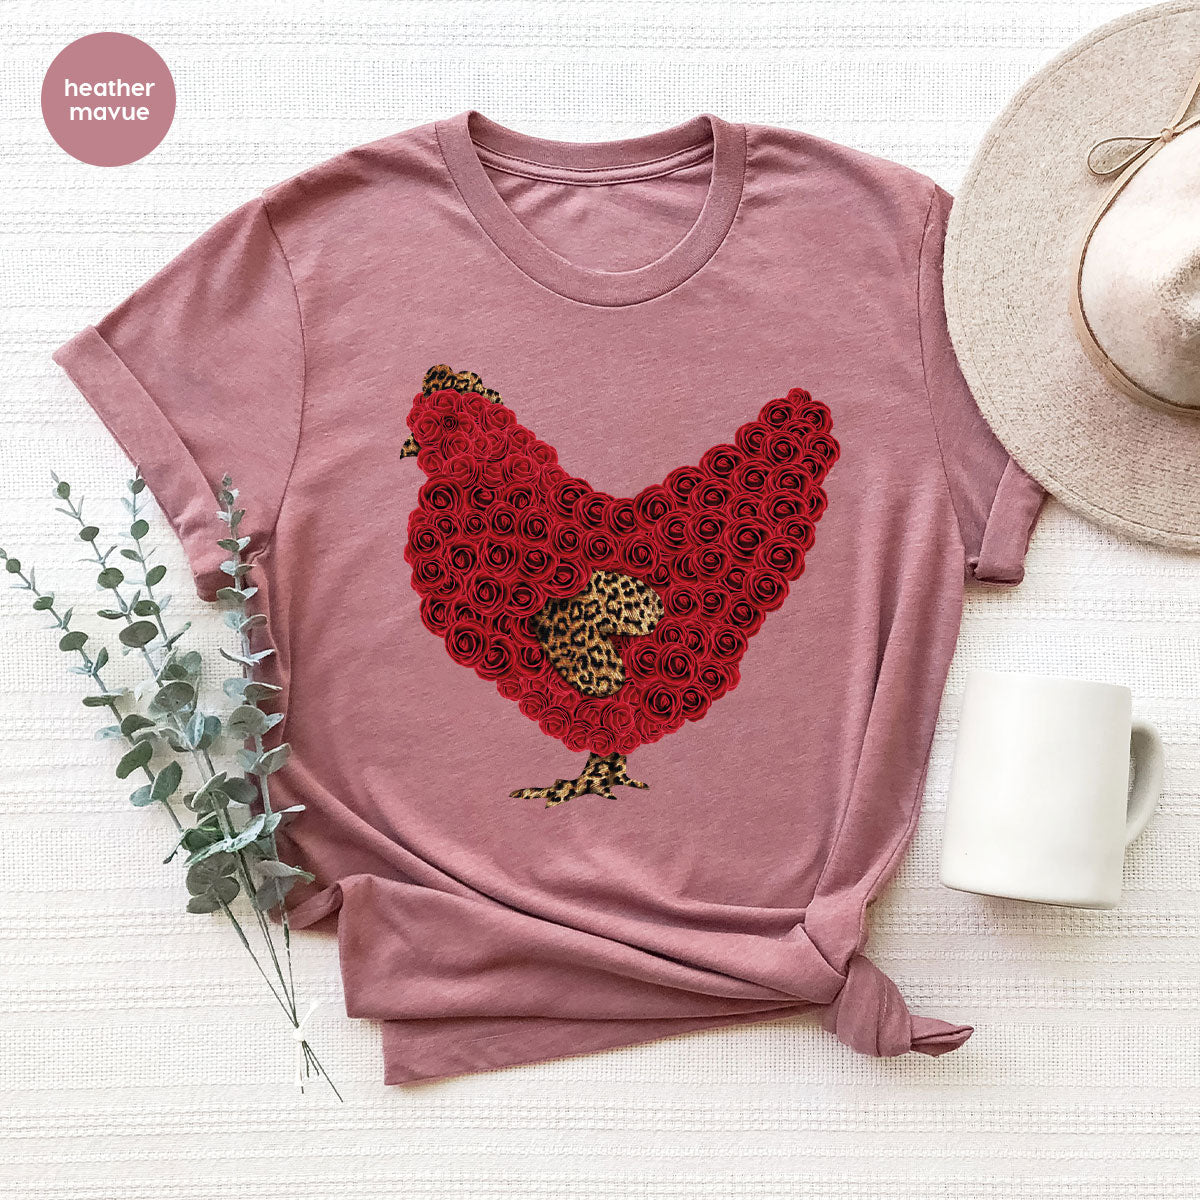 Heart of Chicken Shirt, Funny Valentine Day Gift, Special Gift for Feb 14